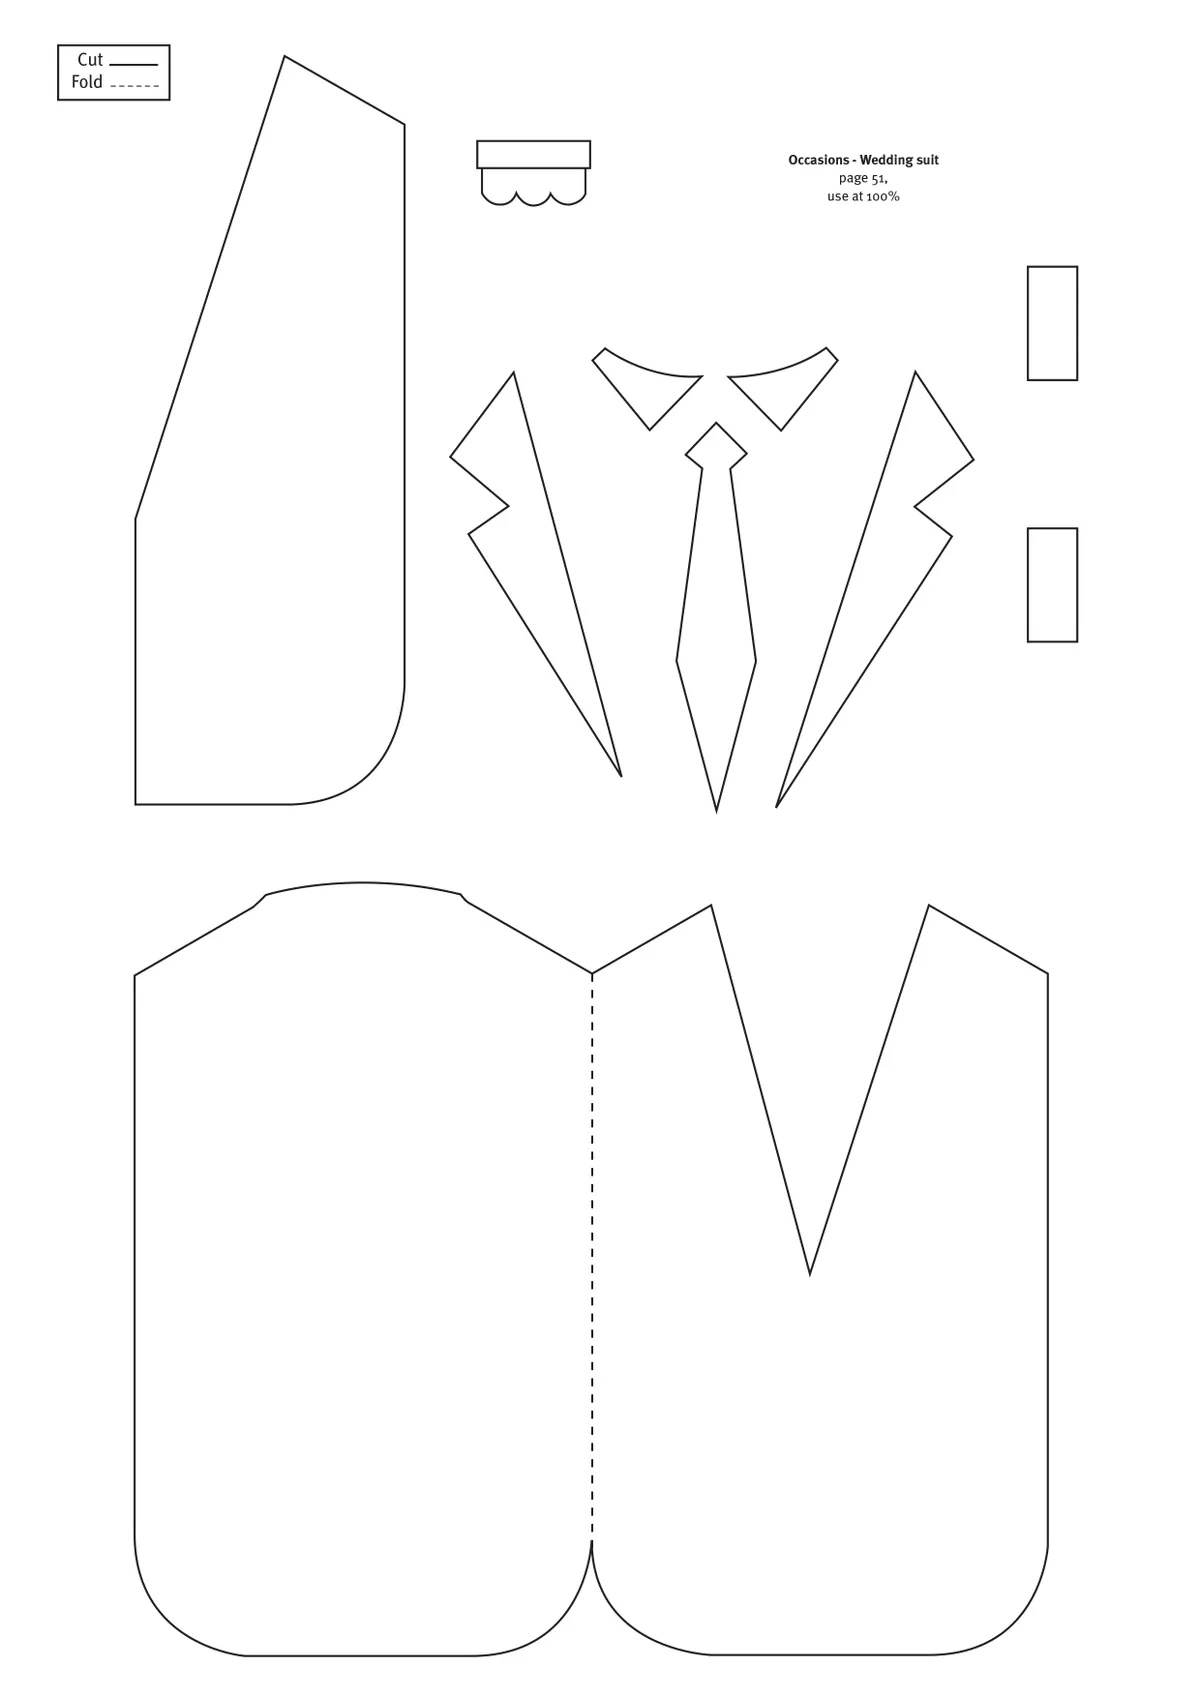 Wedding card template - suit for the Groom